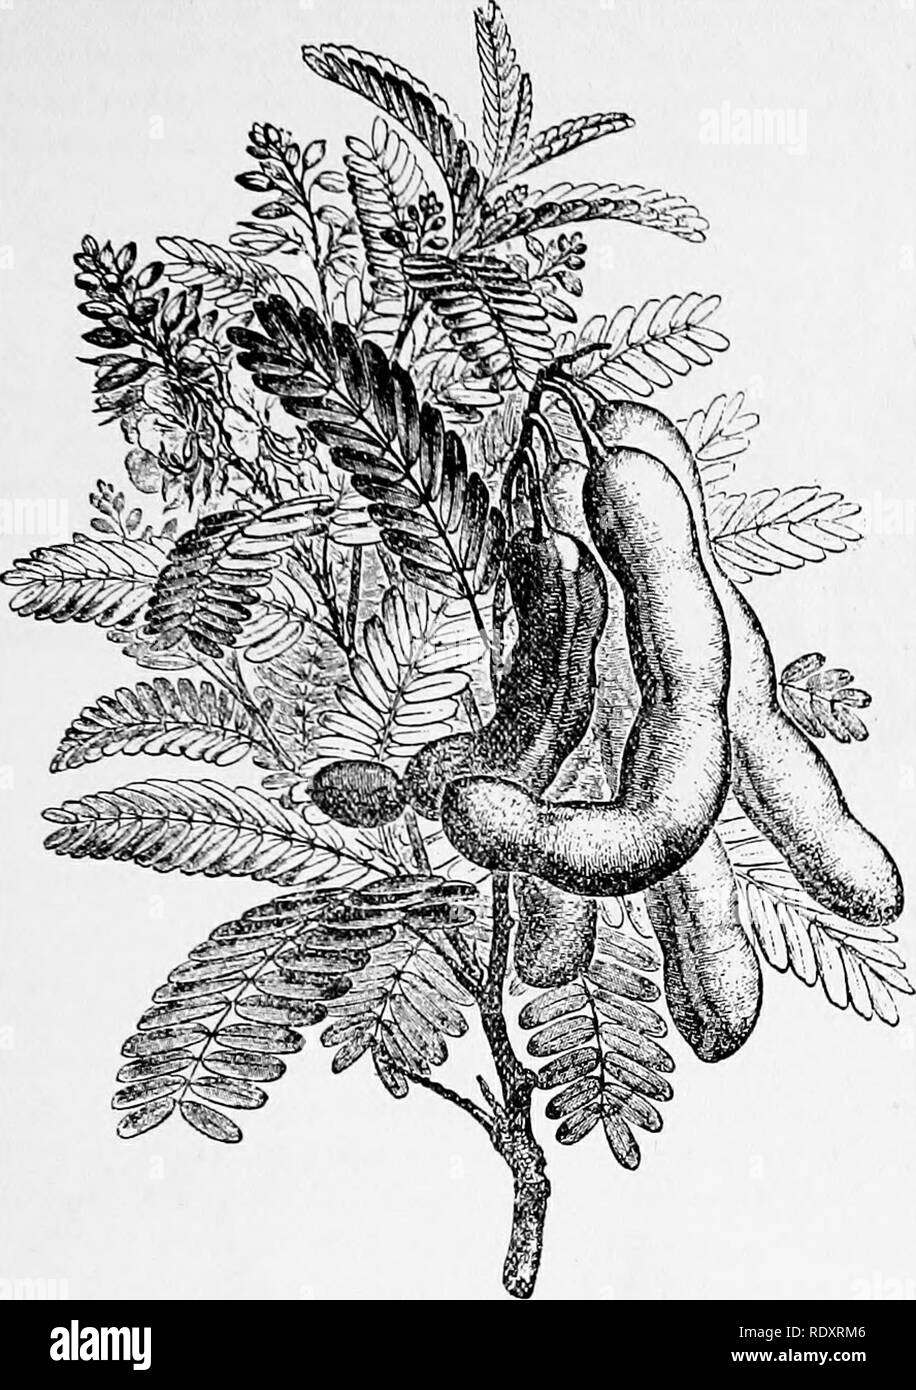 . A manual of poisonous plants, chiefly of eastern North America, with brief notes on economic and medicinal plants, and numerous illustrations. Poisonous plants. LEGUMINOSAE 531. Fig. 290. Tamarind ^Tamarindus indica). Fruit, flow- ers and leaves. Fruit used in making a refreshing drink; seeds furnish a glue. (After Faguet.) Retamin C^jH^^NOj^, is obtained from the young branches of Genista sphaerocarpa. The seed of Trigonella Poenum-Graecum contains trigonellin CjHjNOjj the same alkaloid is said to also occur in the pea, hemp and oats. Physostigmin Cj^H^jNgO^, or eserin occurs in the ripe se Stock Photo